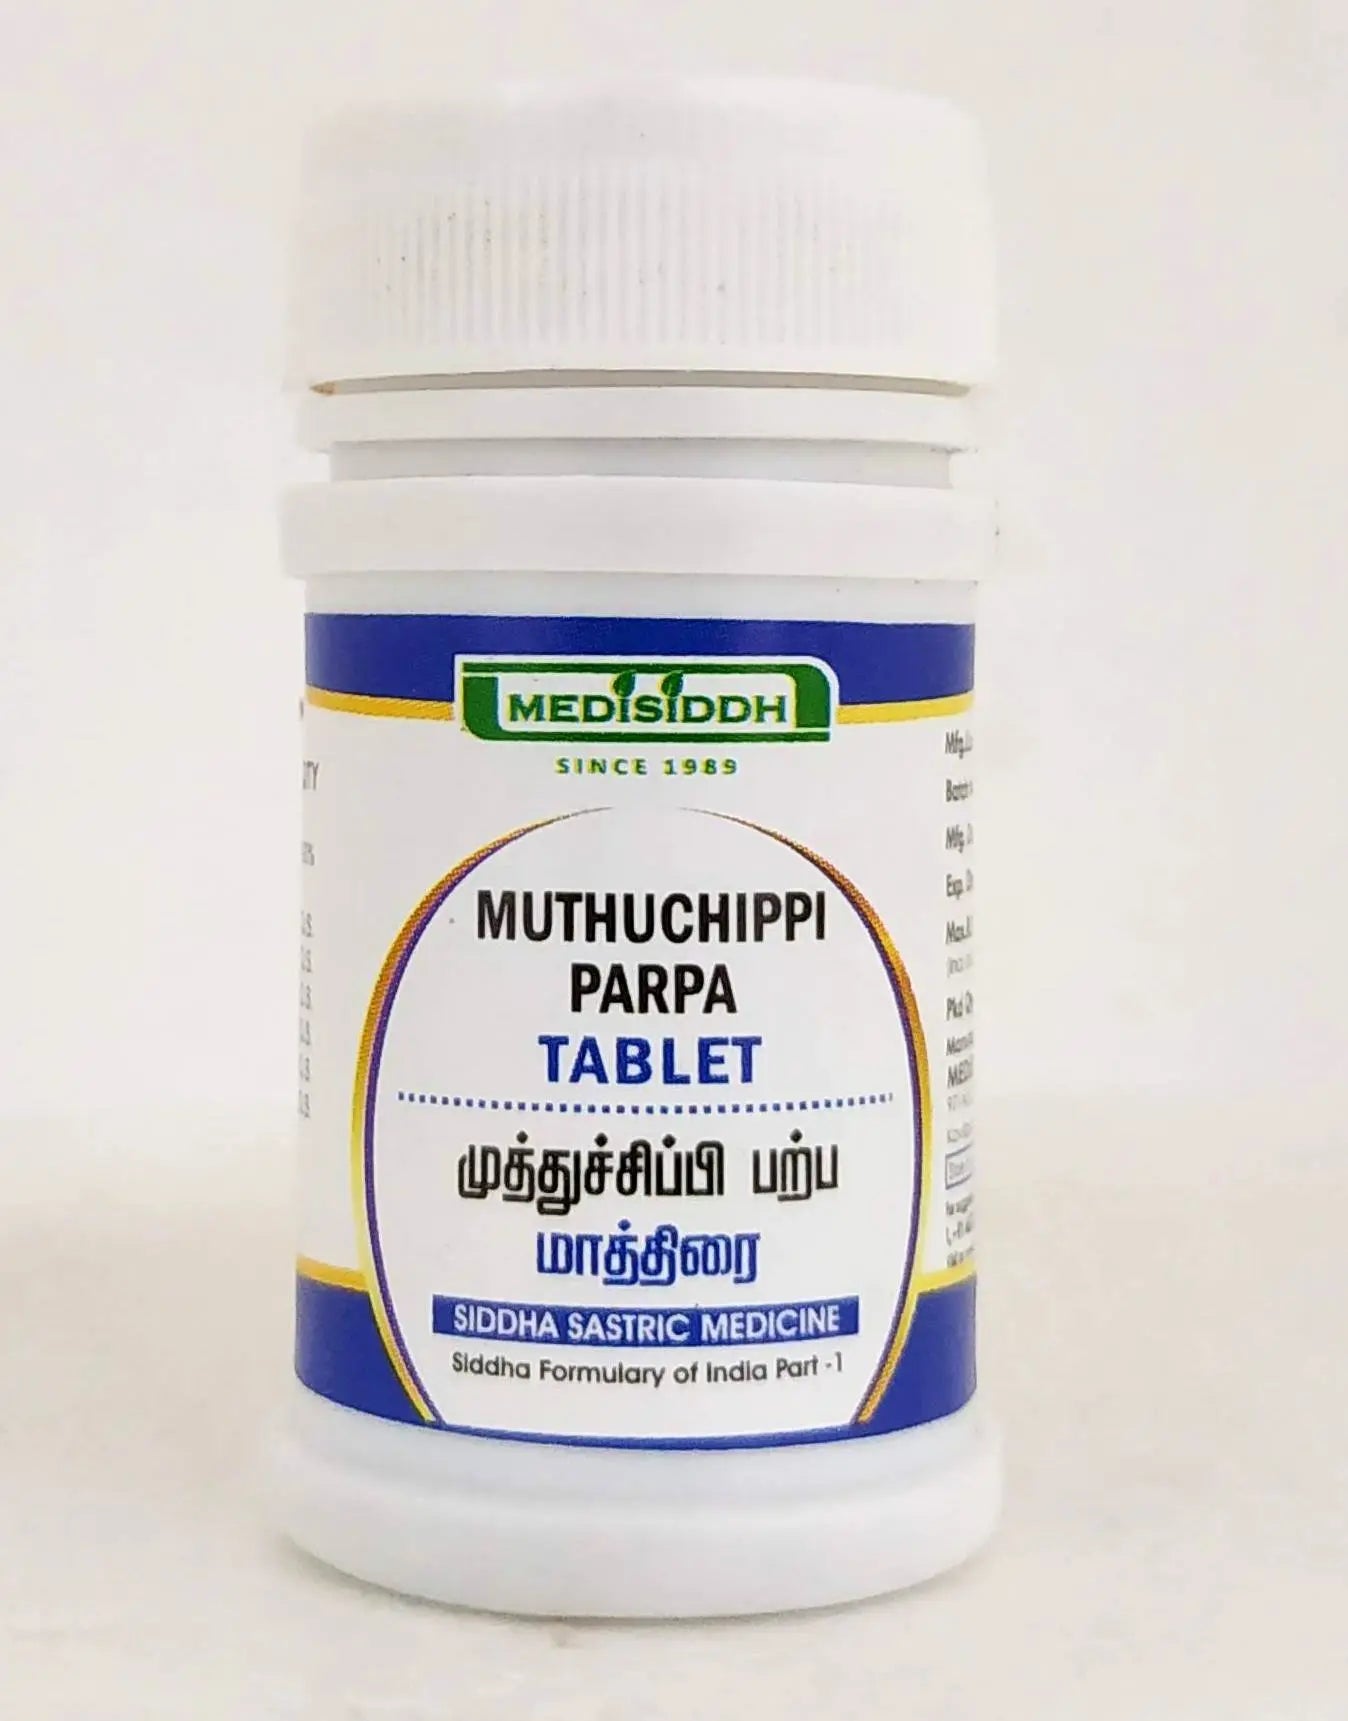 Muthichippi Parpam Tablet - 100Tablets Medisiddh